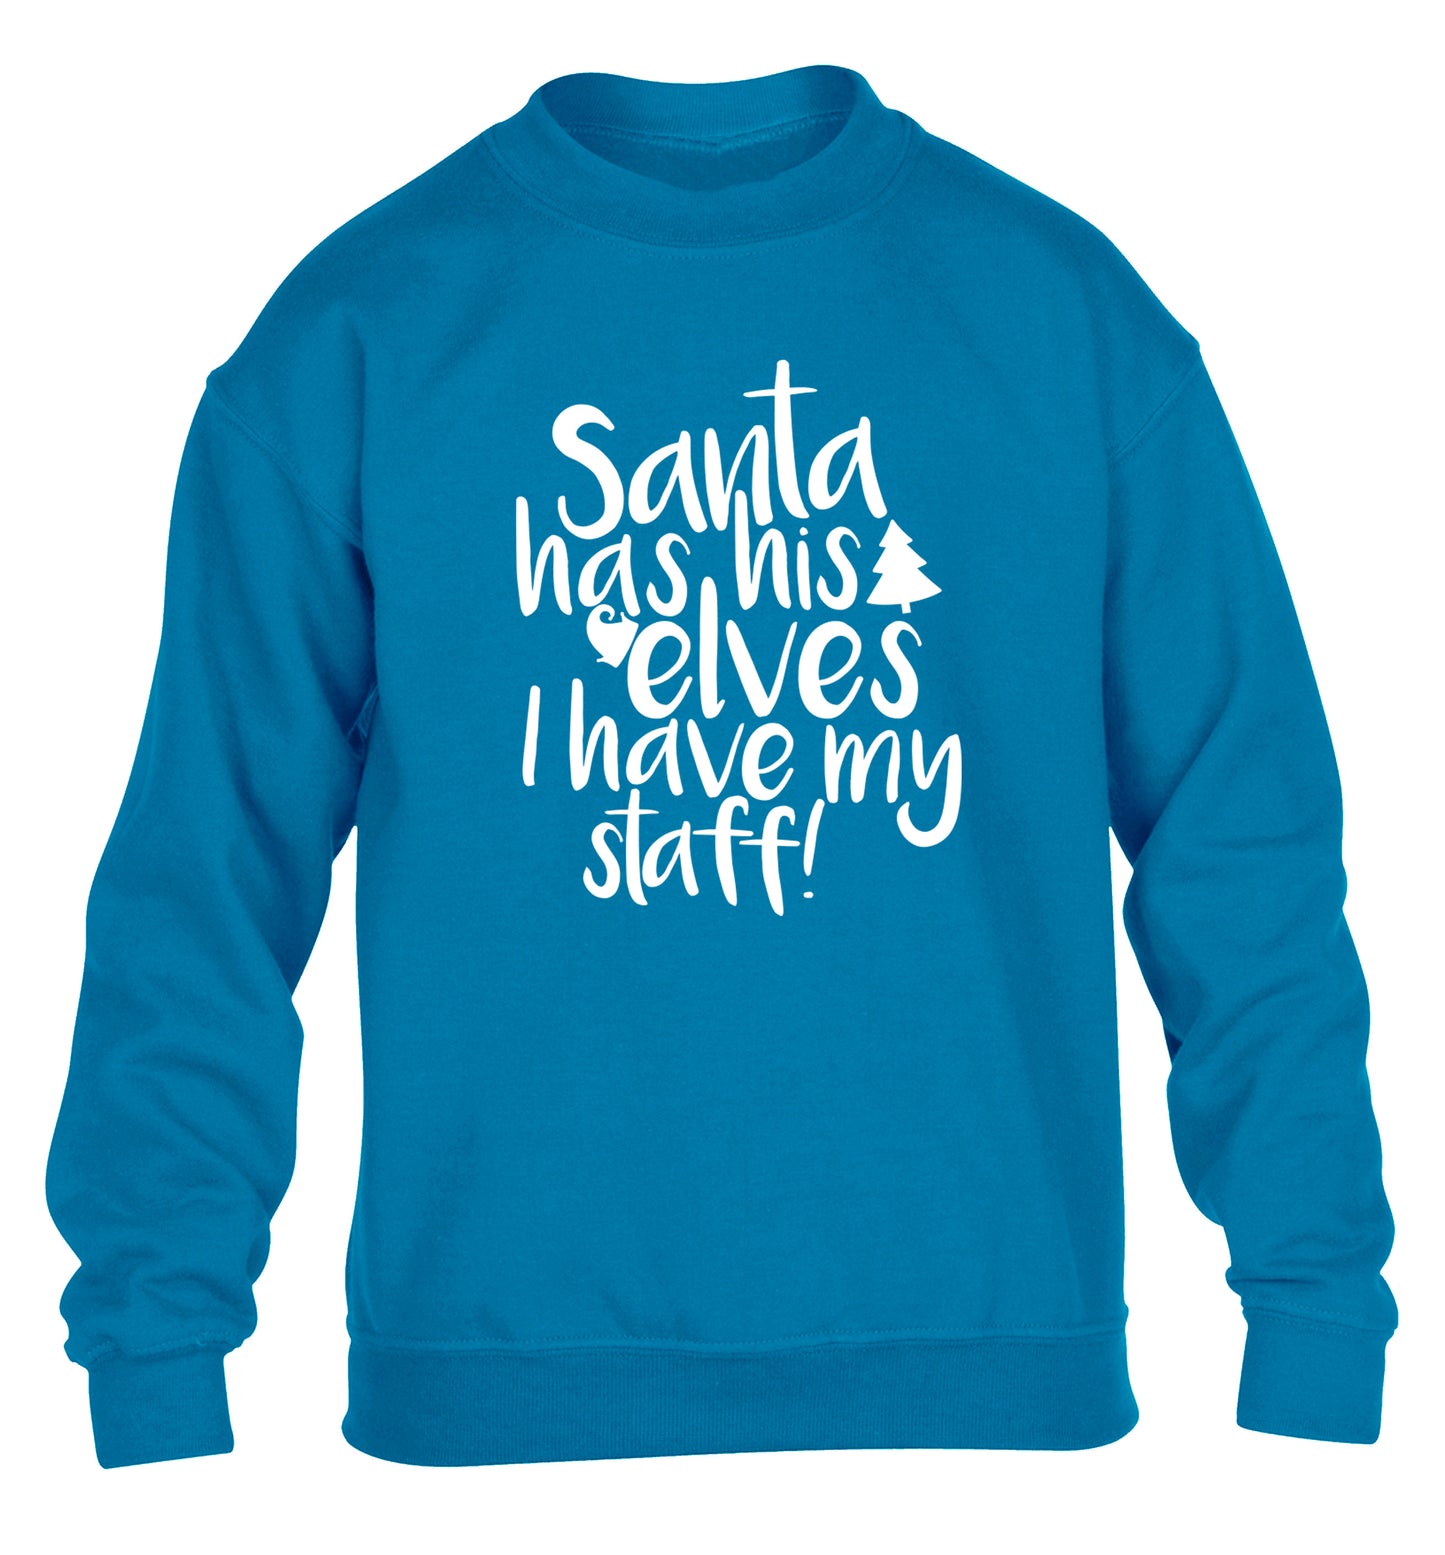 Santa has his elves I have my staff children's blue sweater 12-14 Years